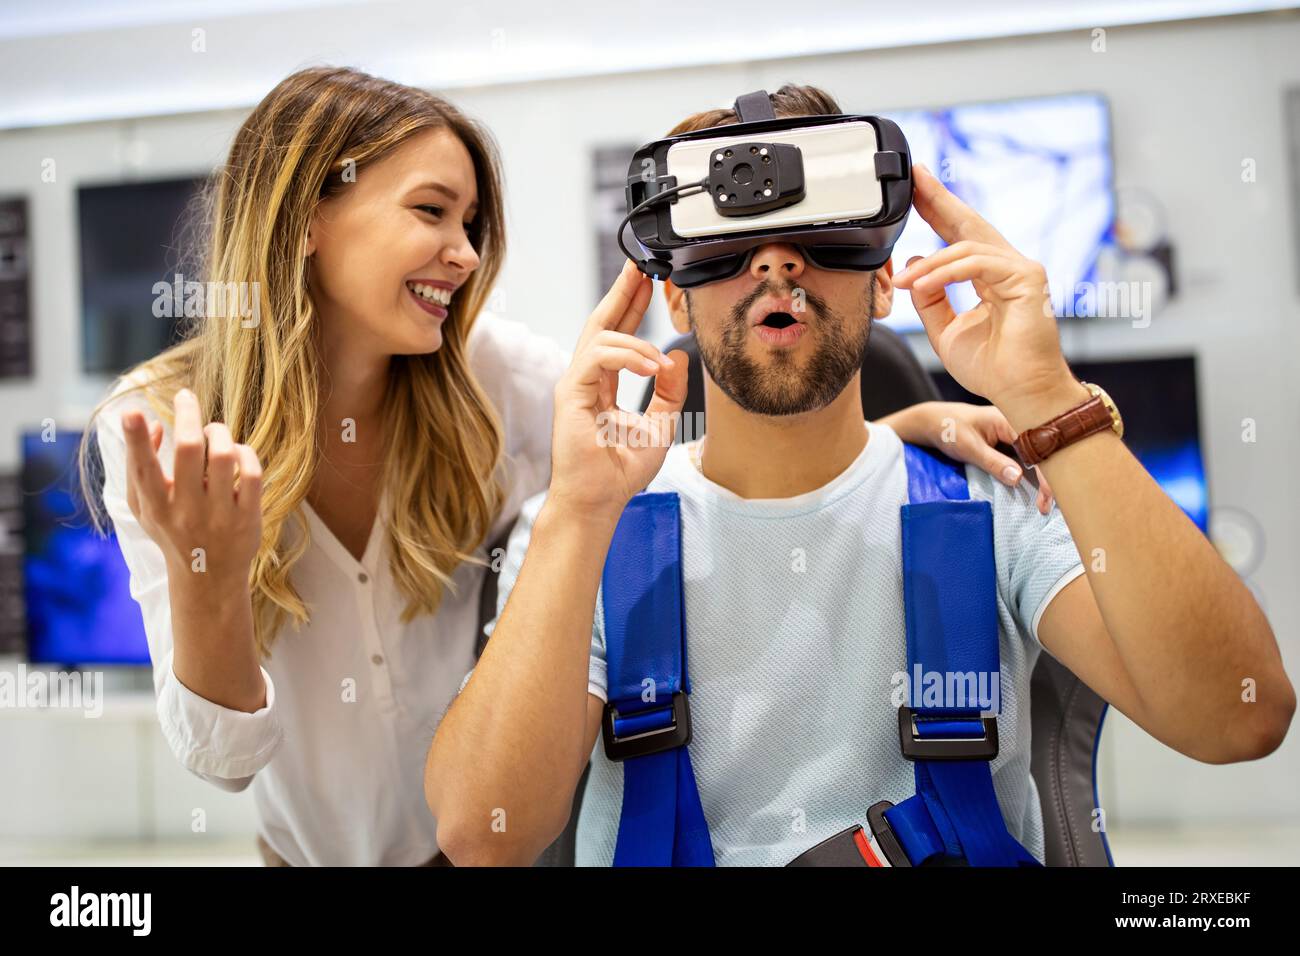 Couple enjoying with VR goggles at tech store. Shopping couple having fun at marketplace. Stock Photo